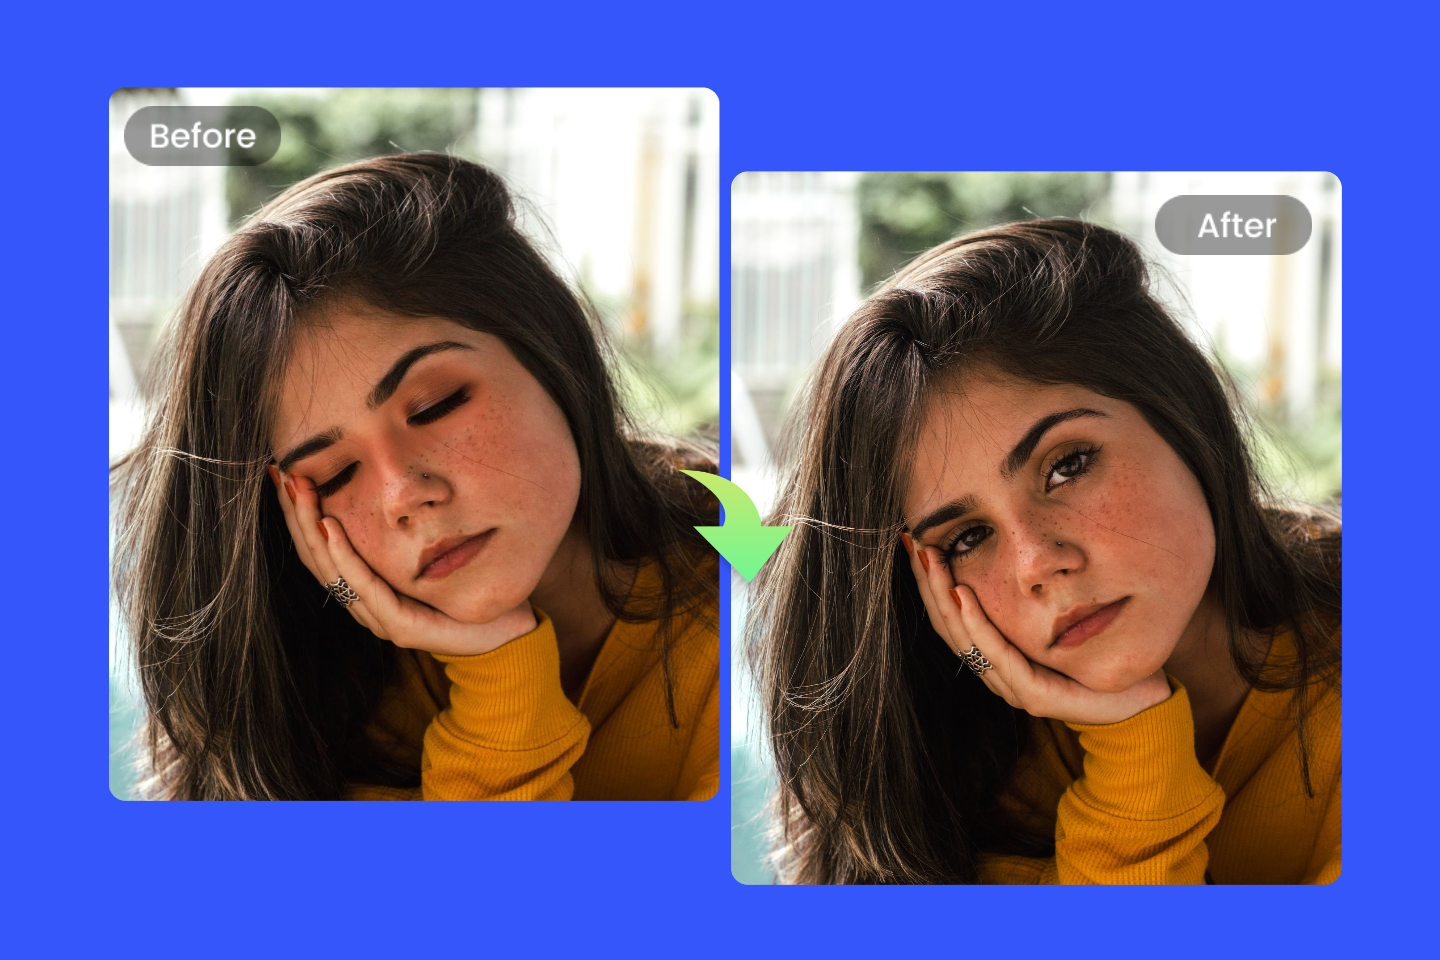 Fix a girl photo of closed eyes with ai